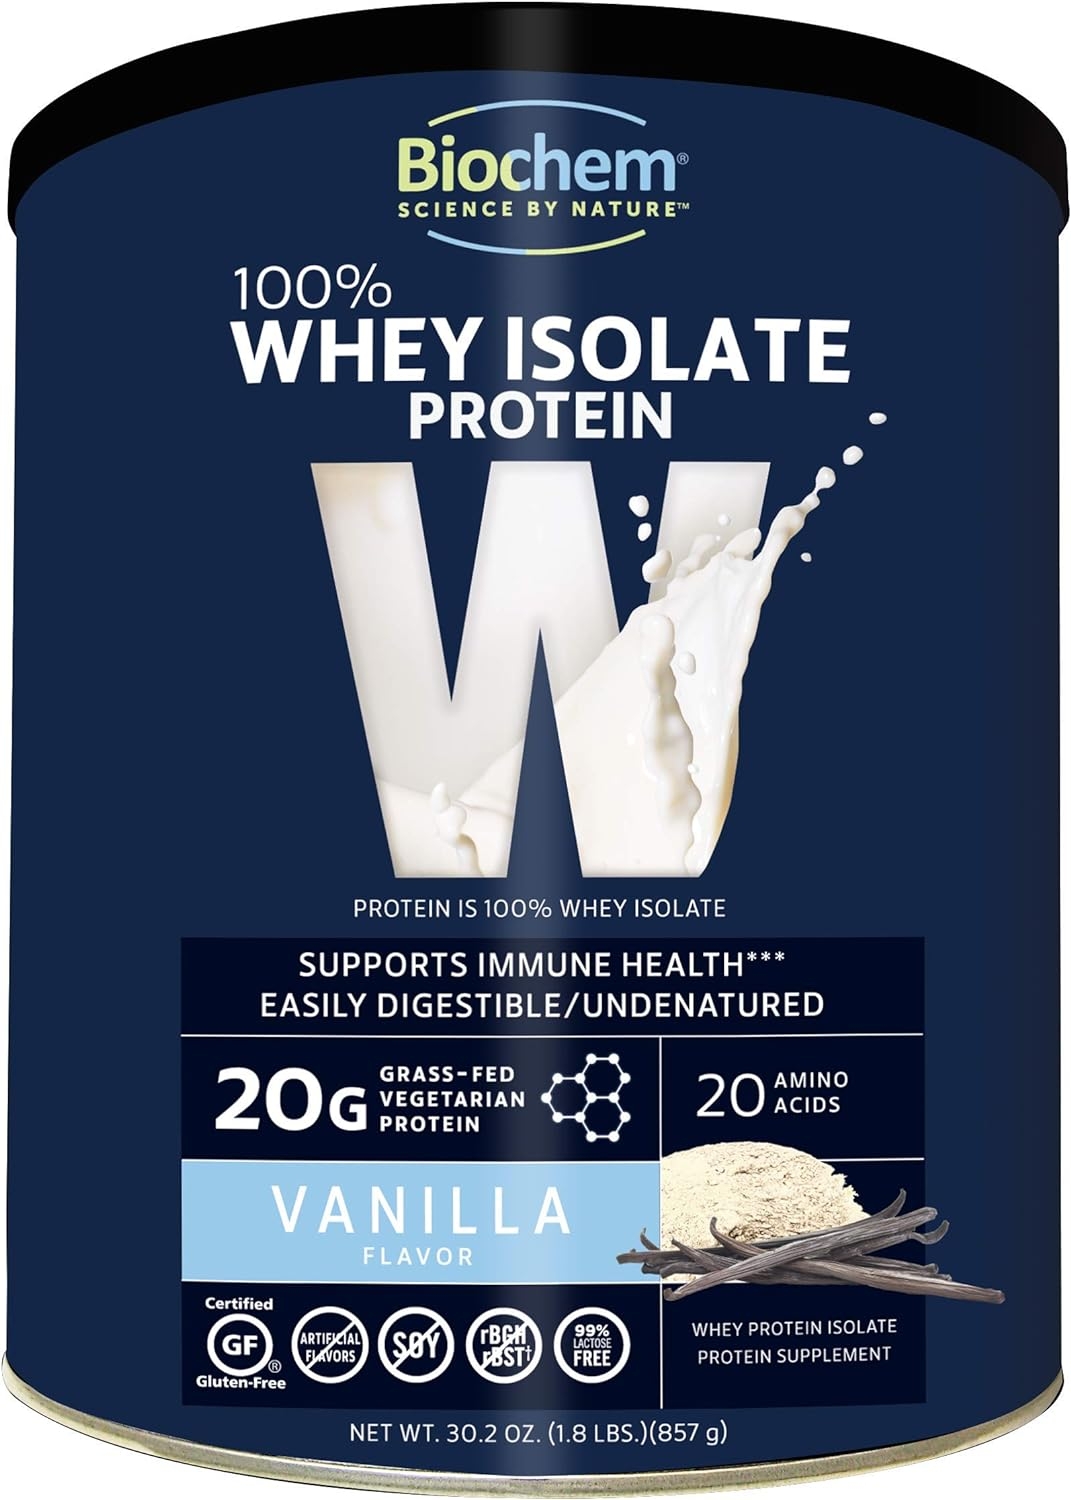 Biochem 100% Whey Isolate Protein - Vanilla - 30.2 oz - 20g of Protein - Meal Replacement -Supports Lean Muscle - Easily Digestible - Silky Smooth Taste - Amino Acids